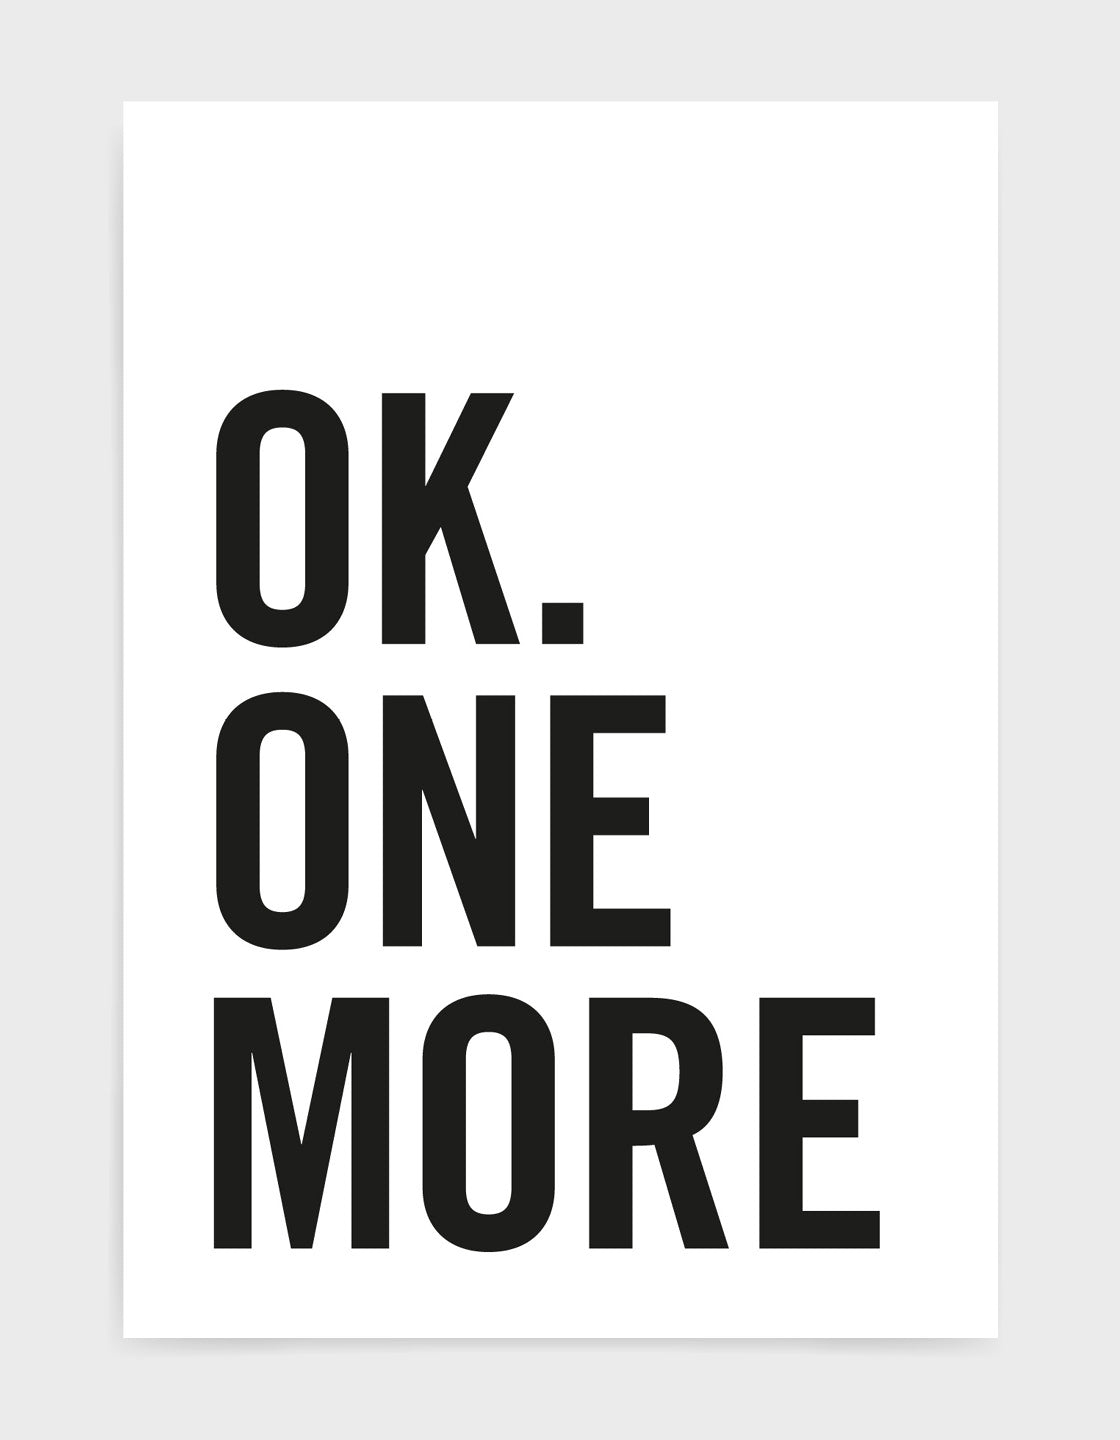 typography art print with OK one more in black against a white background